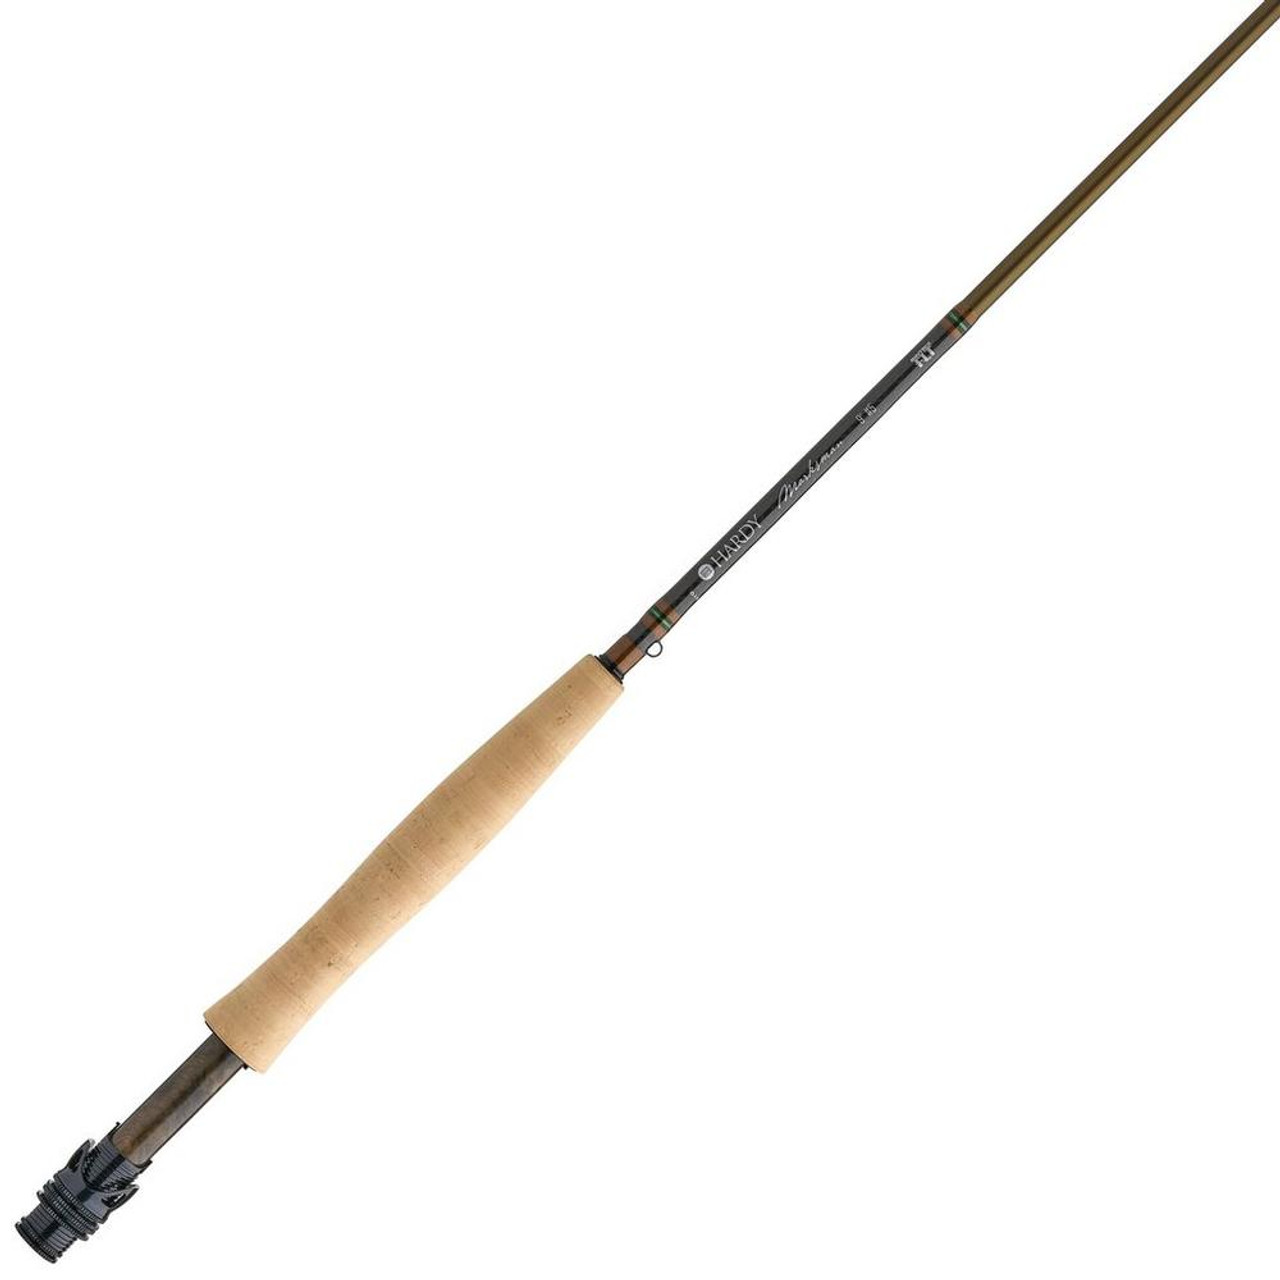 Sextant Saltwater Rod 9' 6wt 4 Piece53167 - Gordy & Sons Outfitters